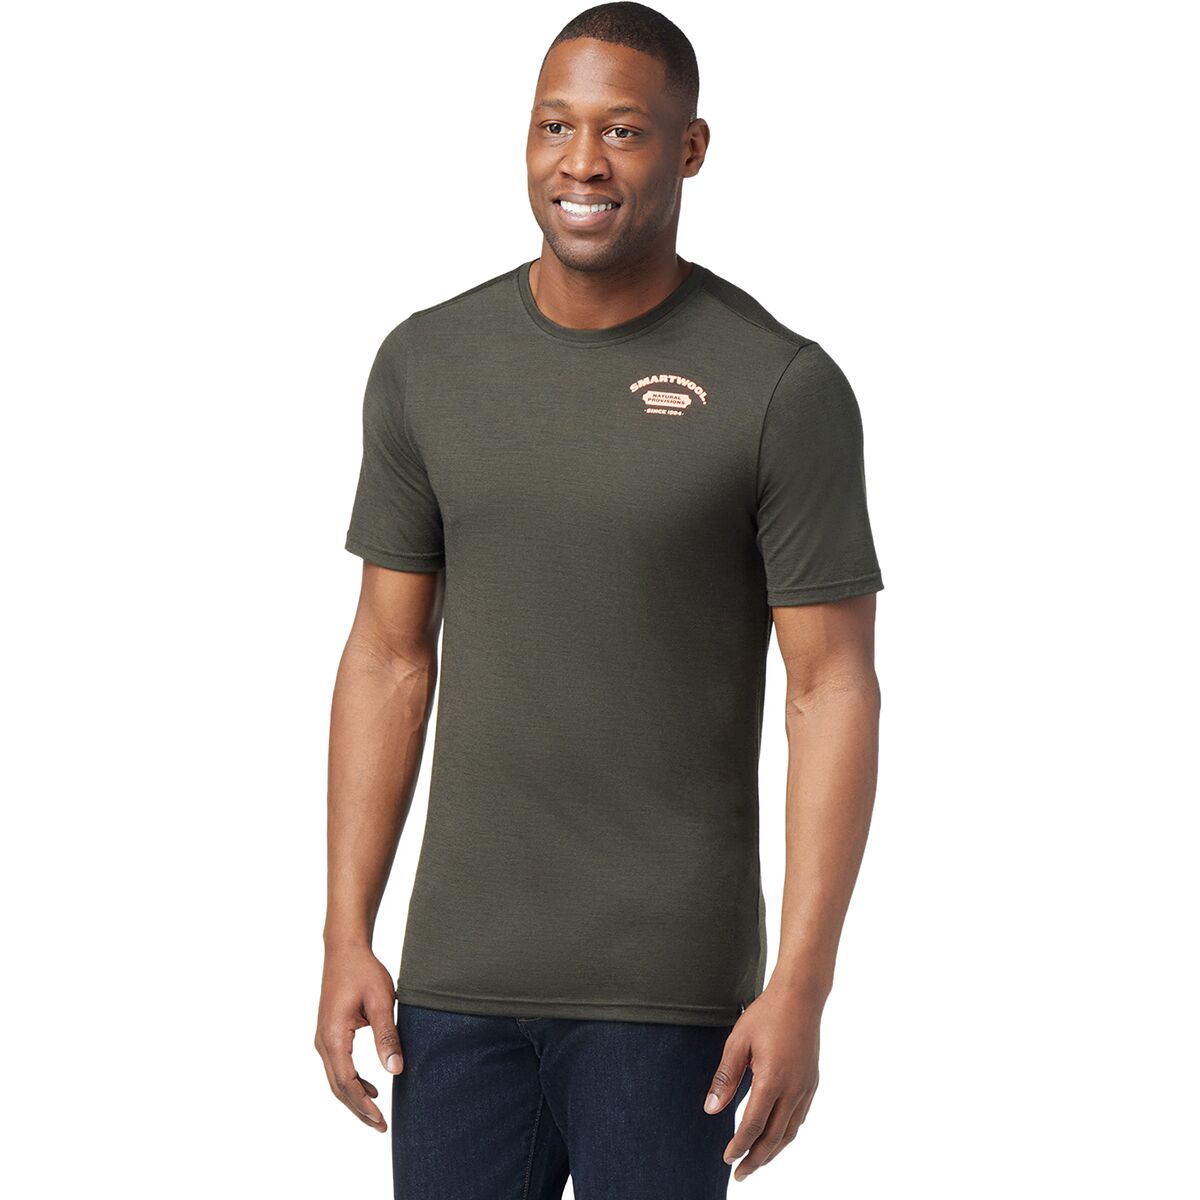 Smartwool Natural Provisions Graphic T-Shirt - Men's